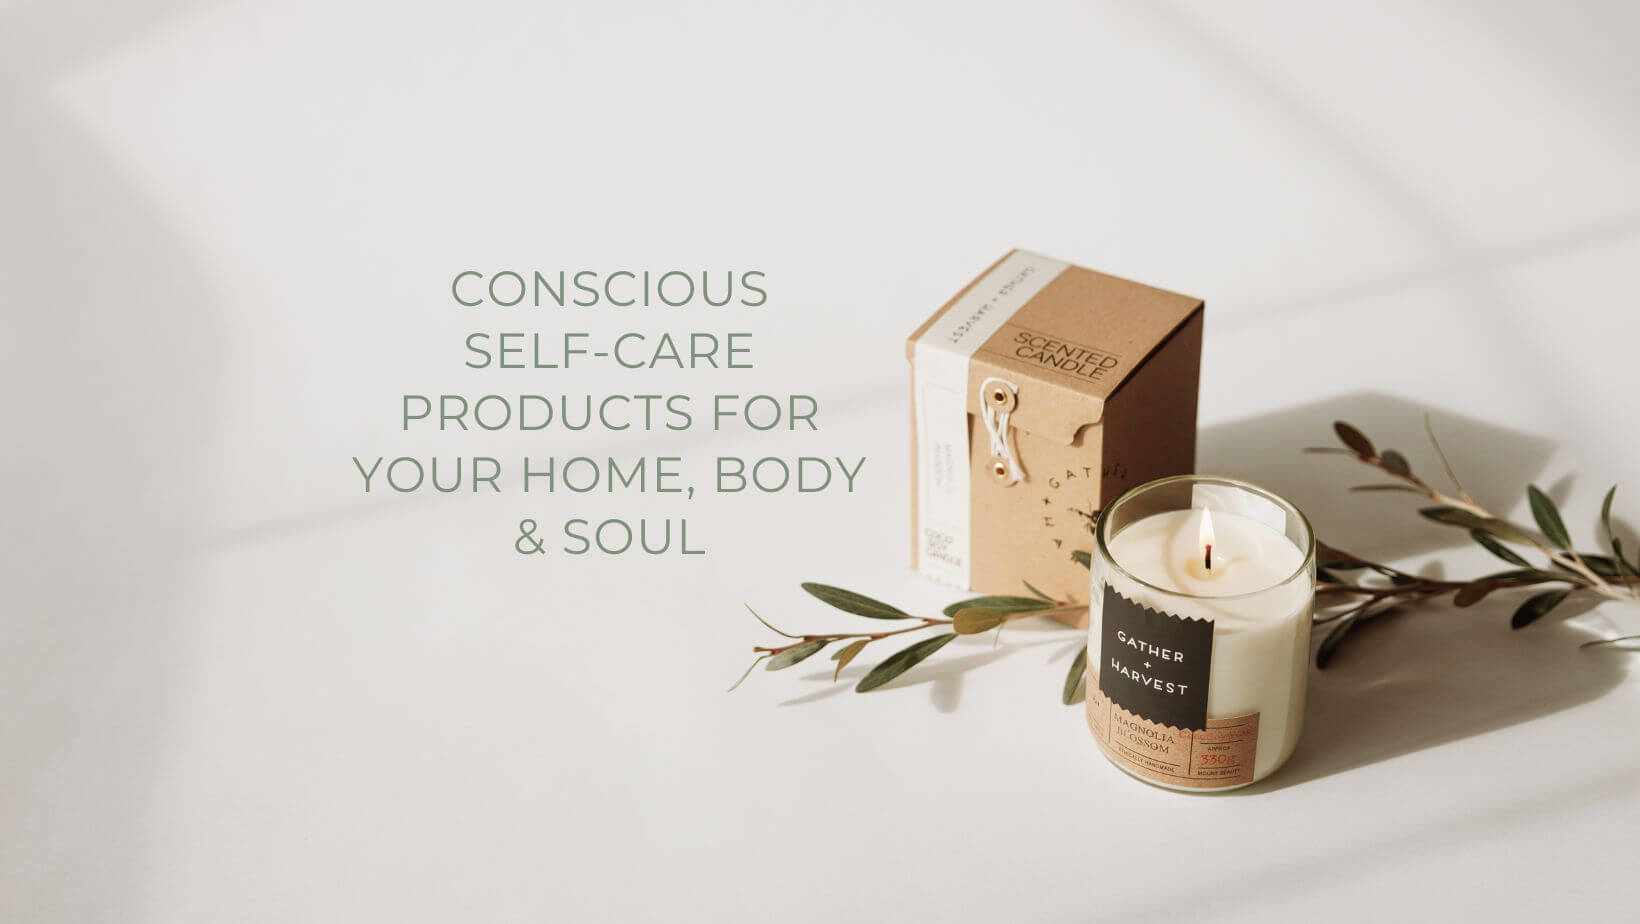 Gather + Harvest is famous for its conscious selfc-are products for body and soul